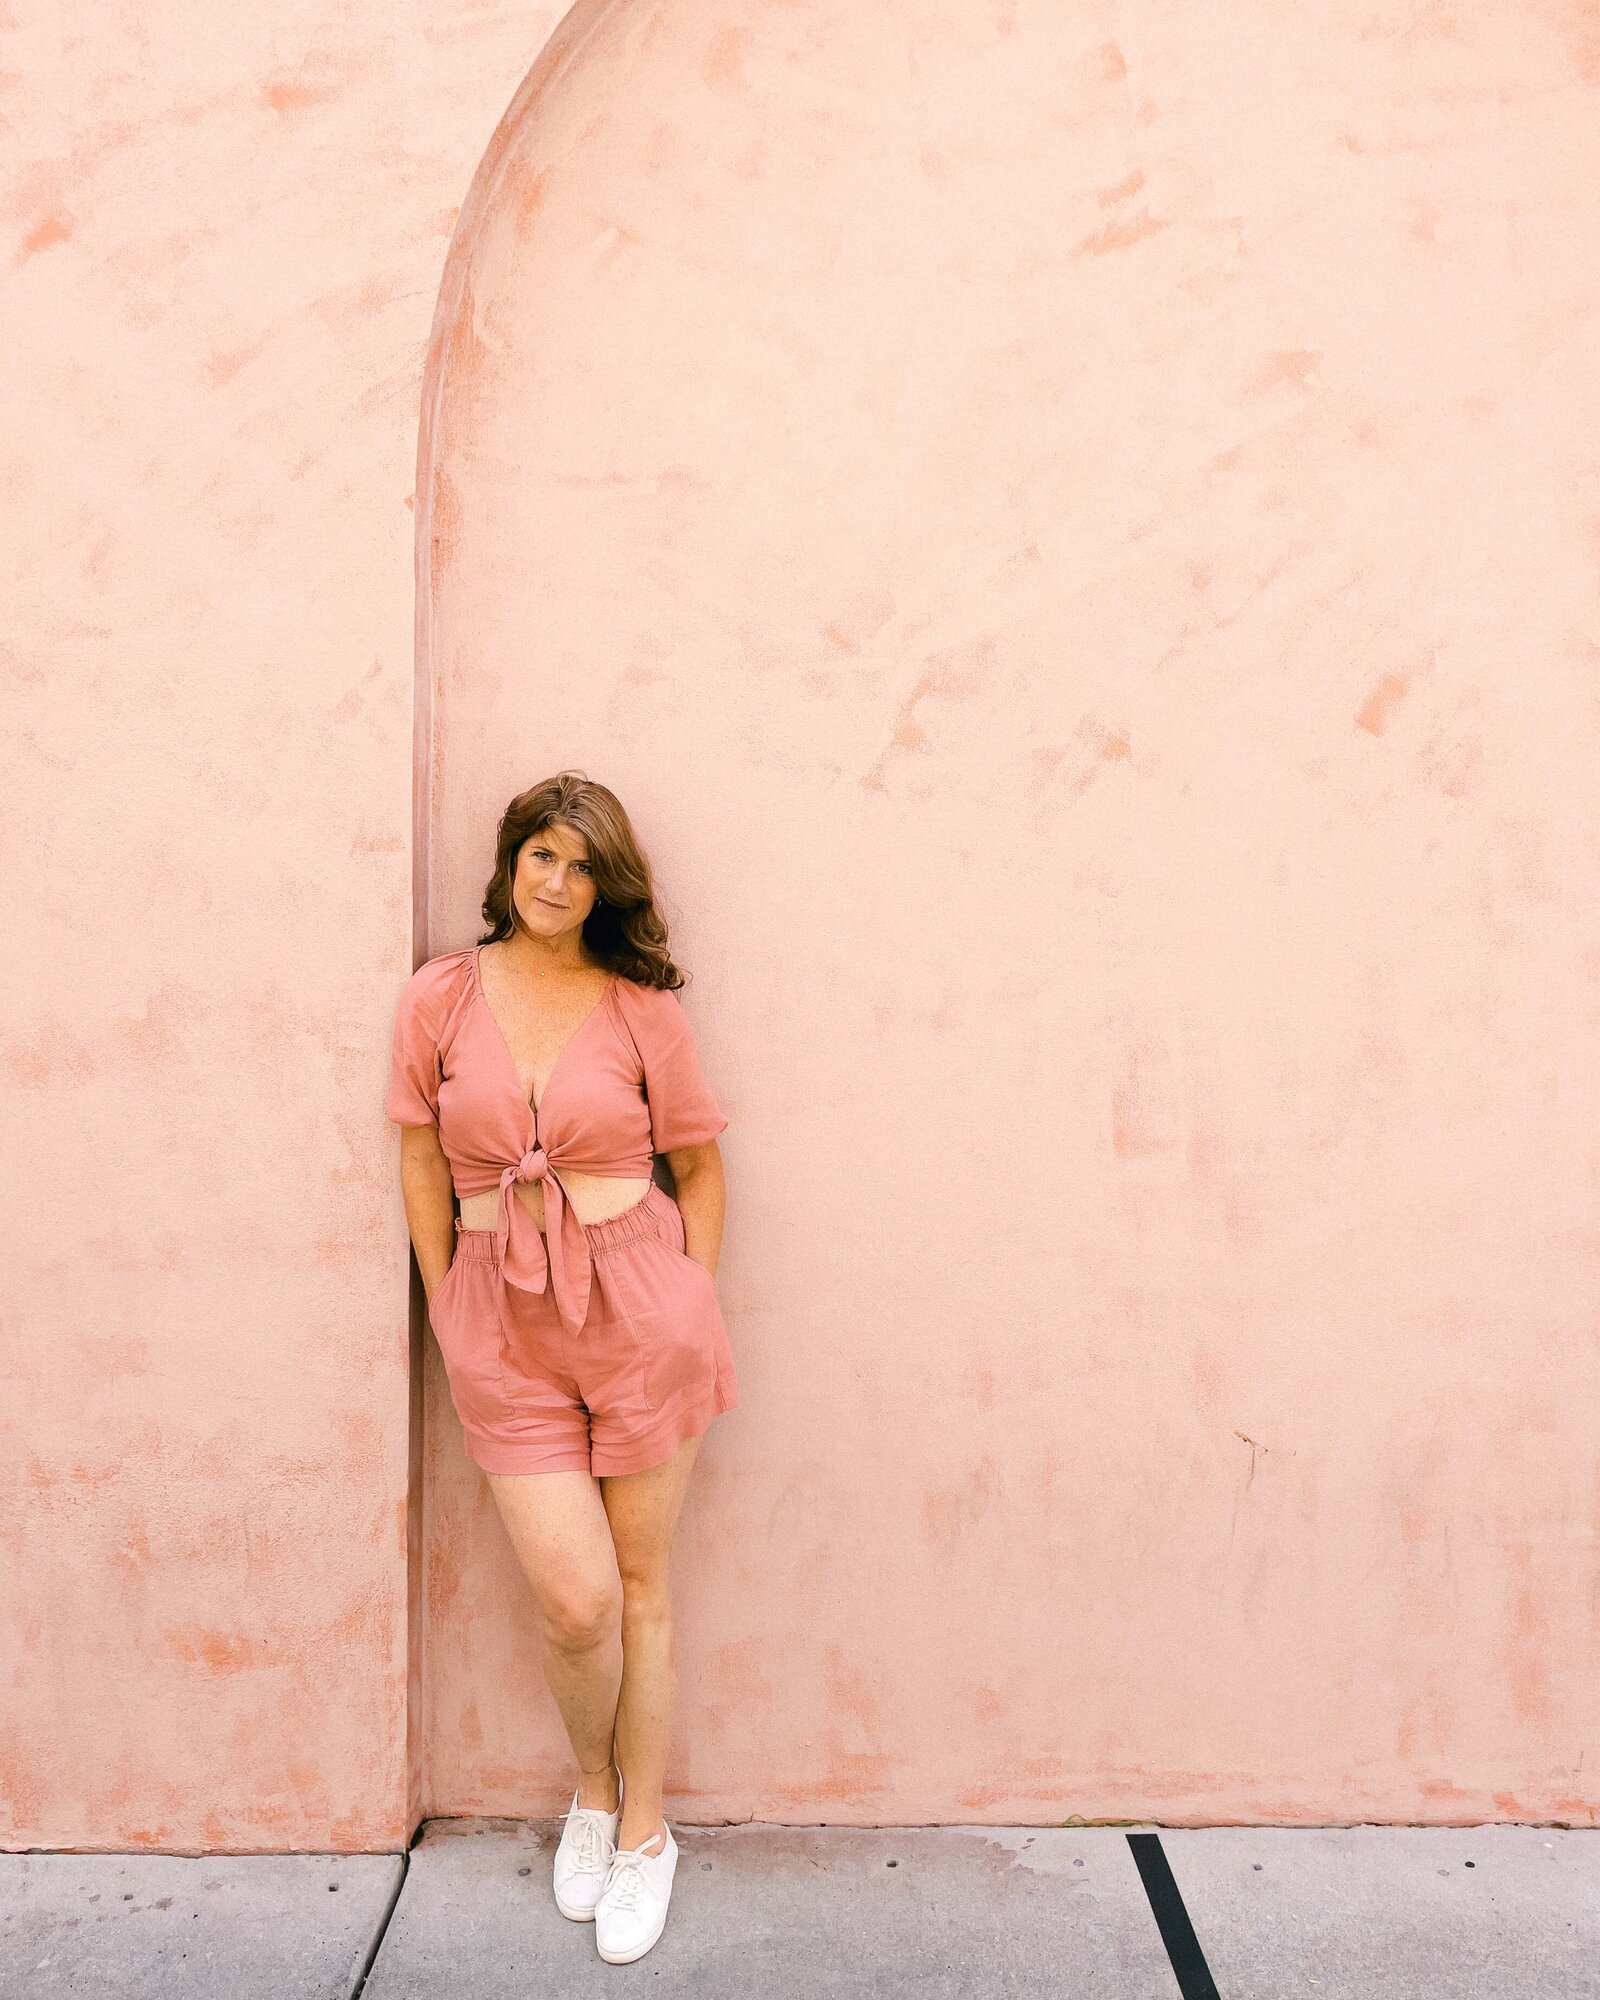 Pink wall and pink romper woman Gayle Dawn leaning up against wall for social media posing photos.